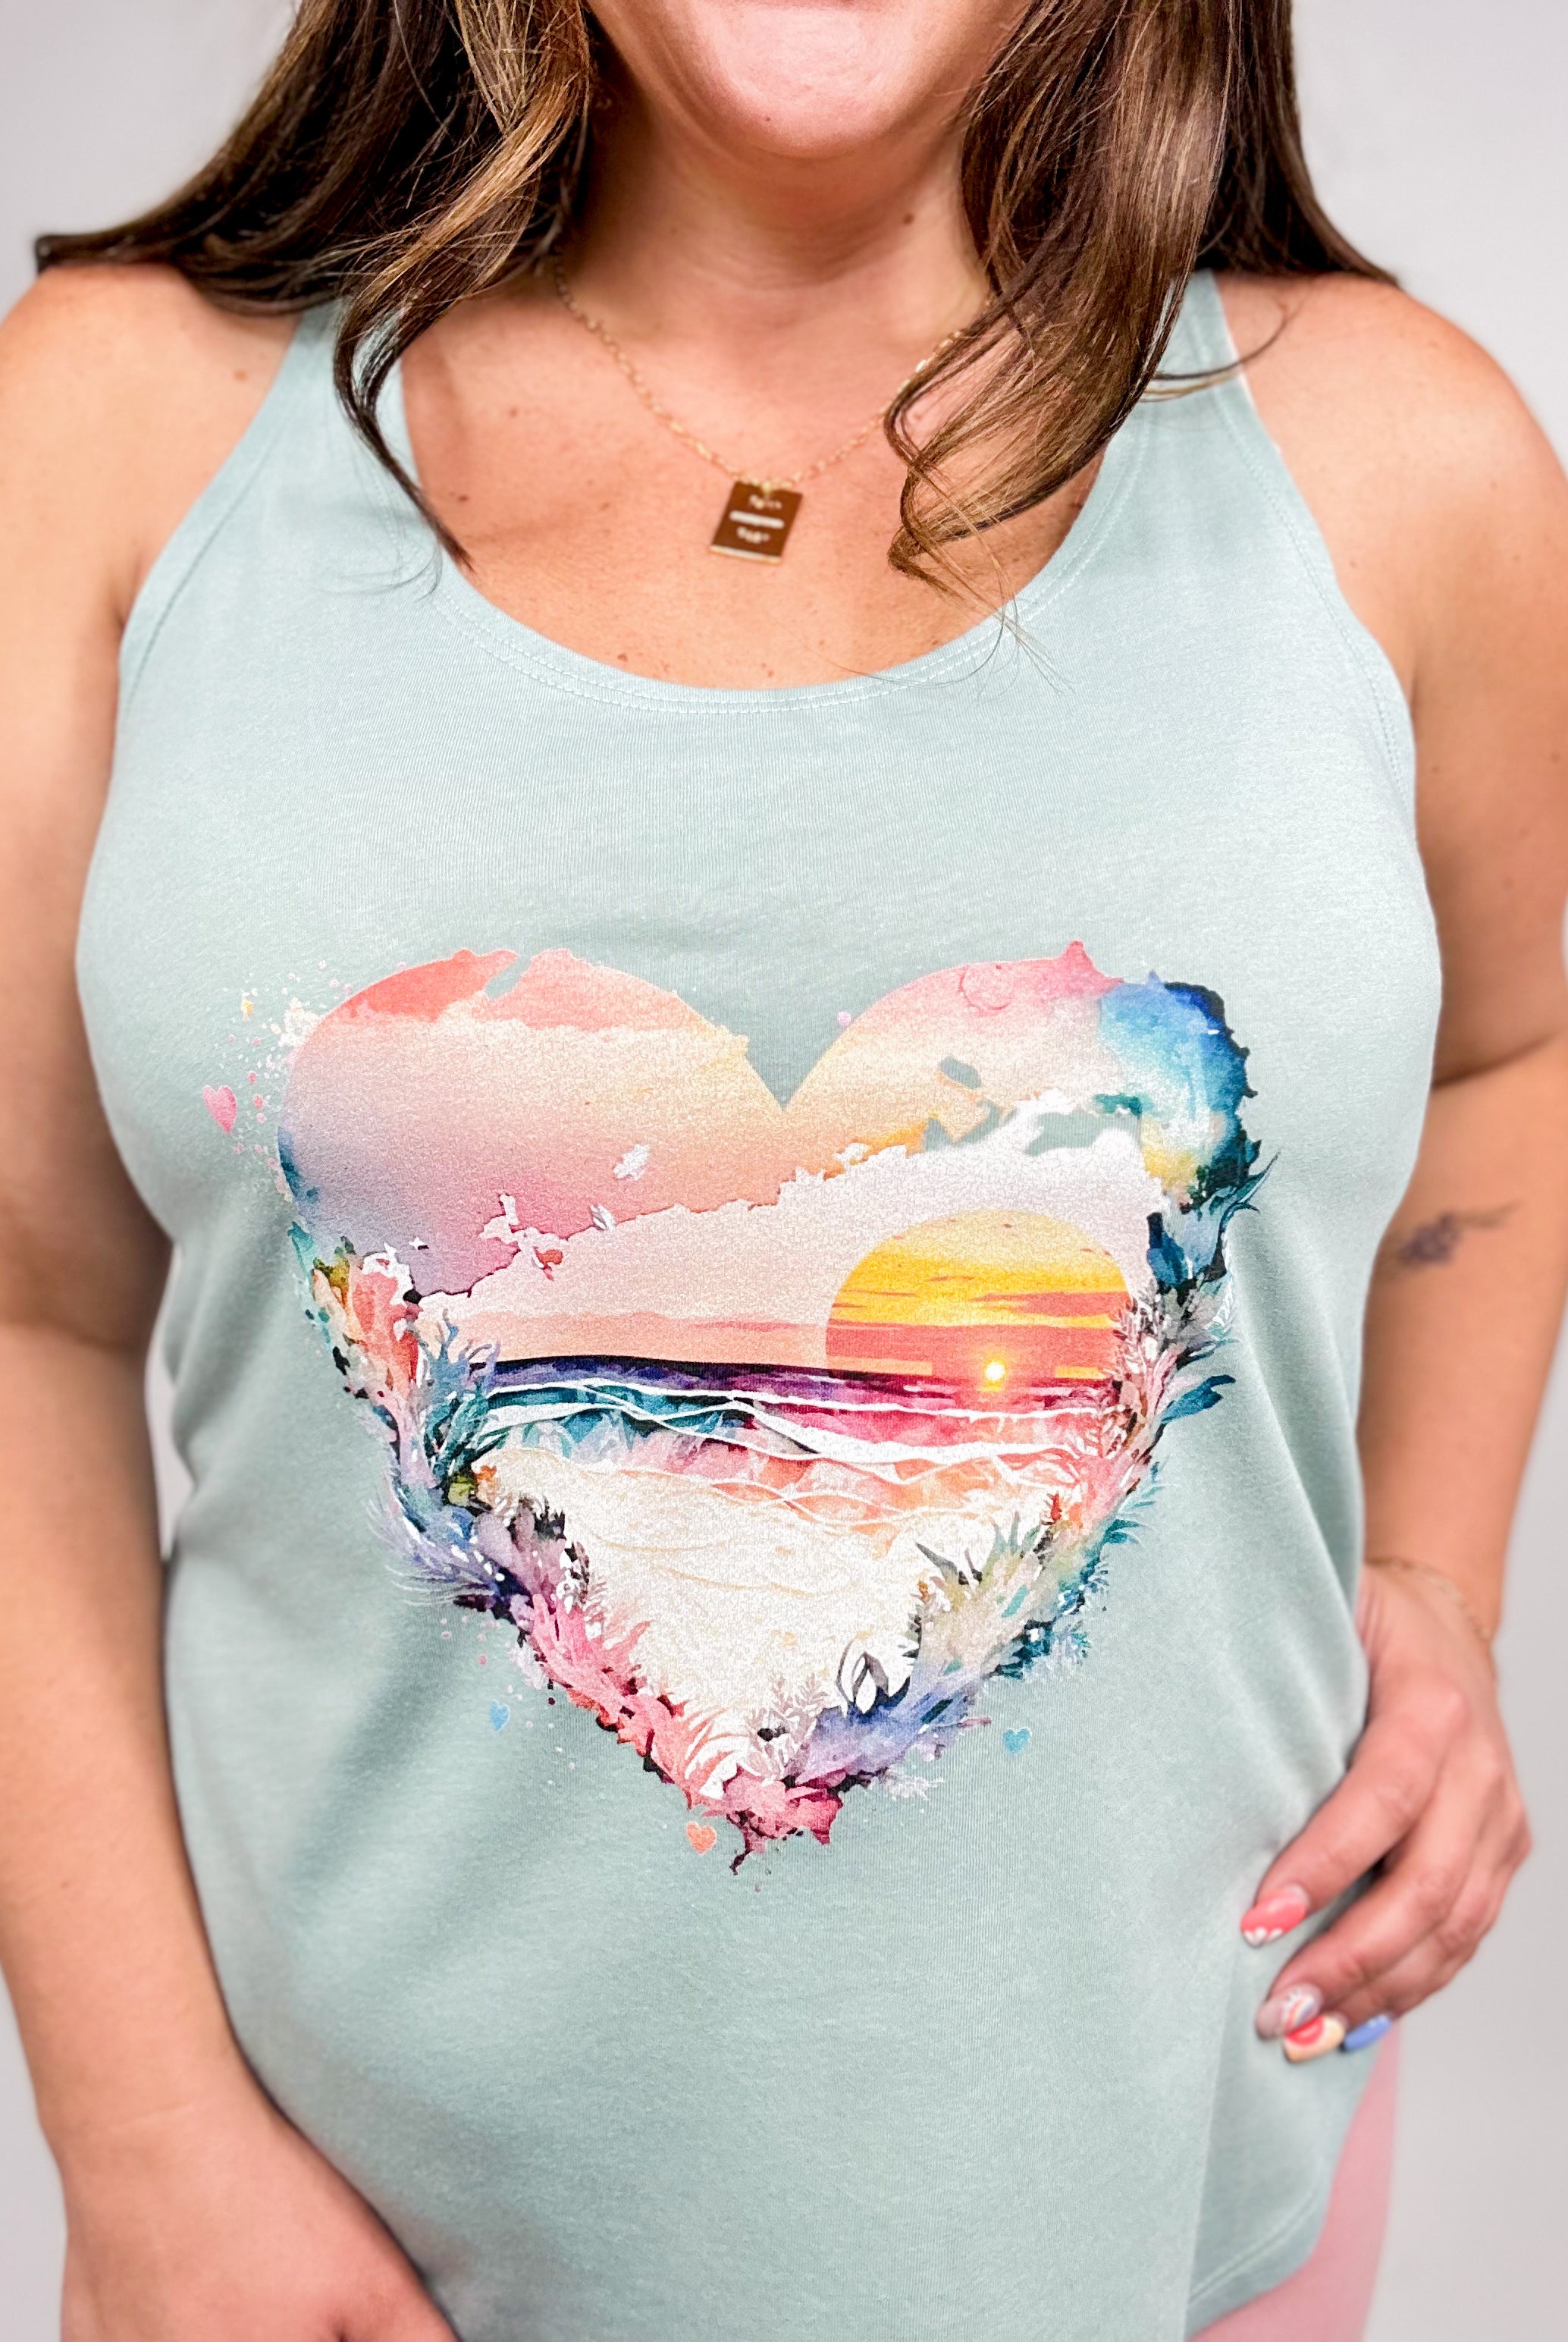 Sunset Waves in my Heart Graphic Tank-130 Graphic Tees-Heathered Boho-Heathered Boho Boutique, Women's Fashion and Accessories in Palmetto, FL